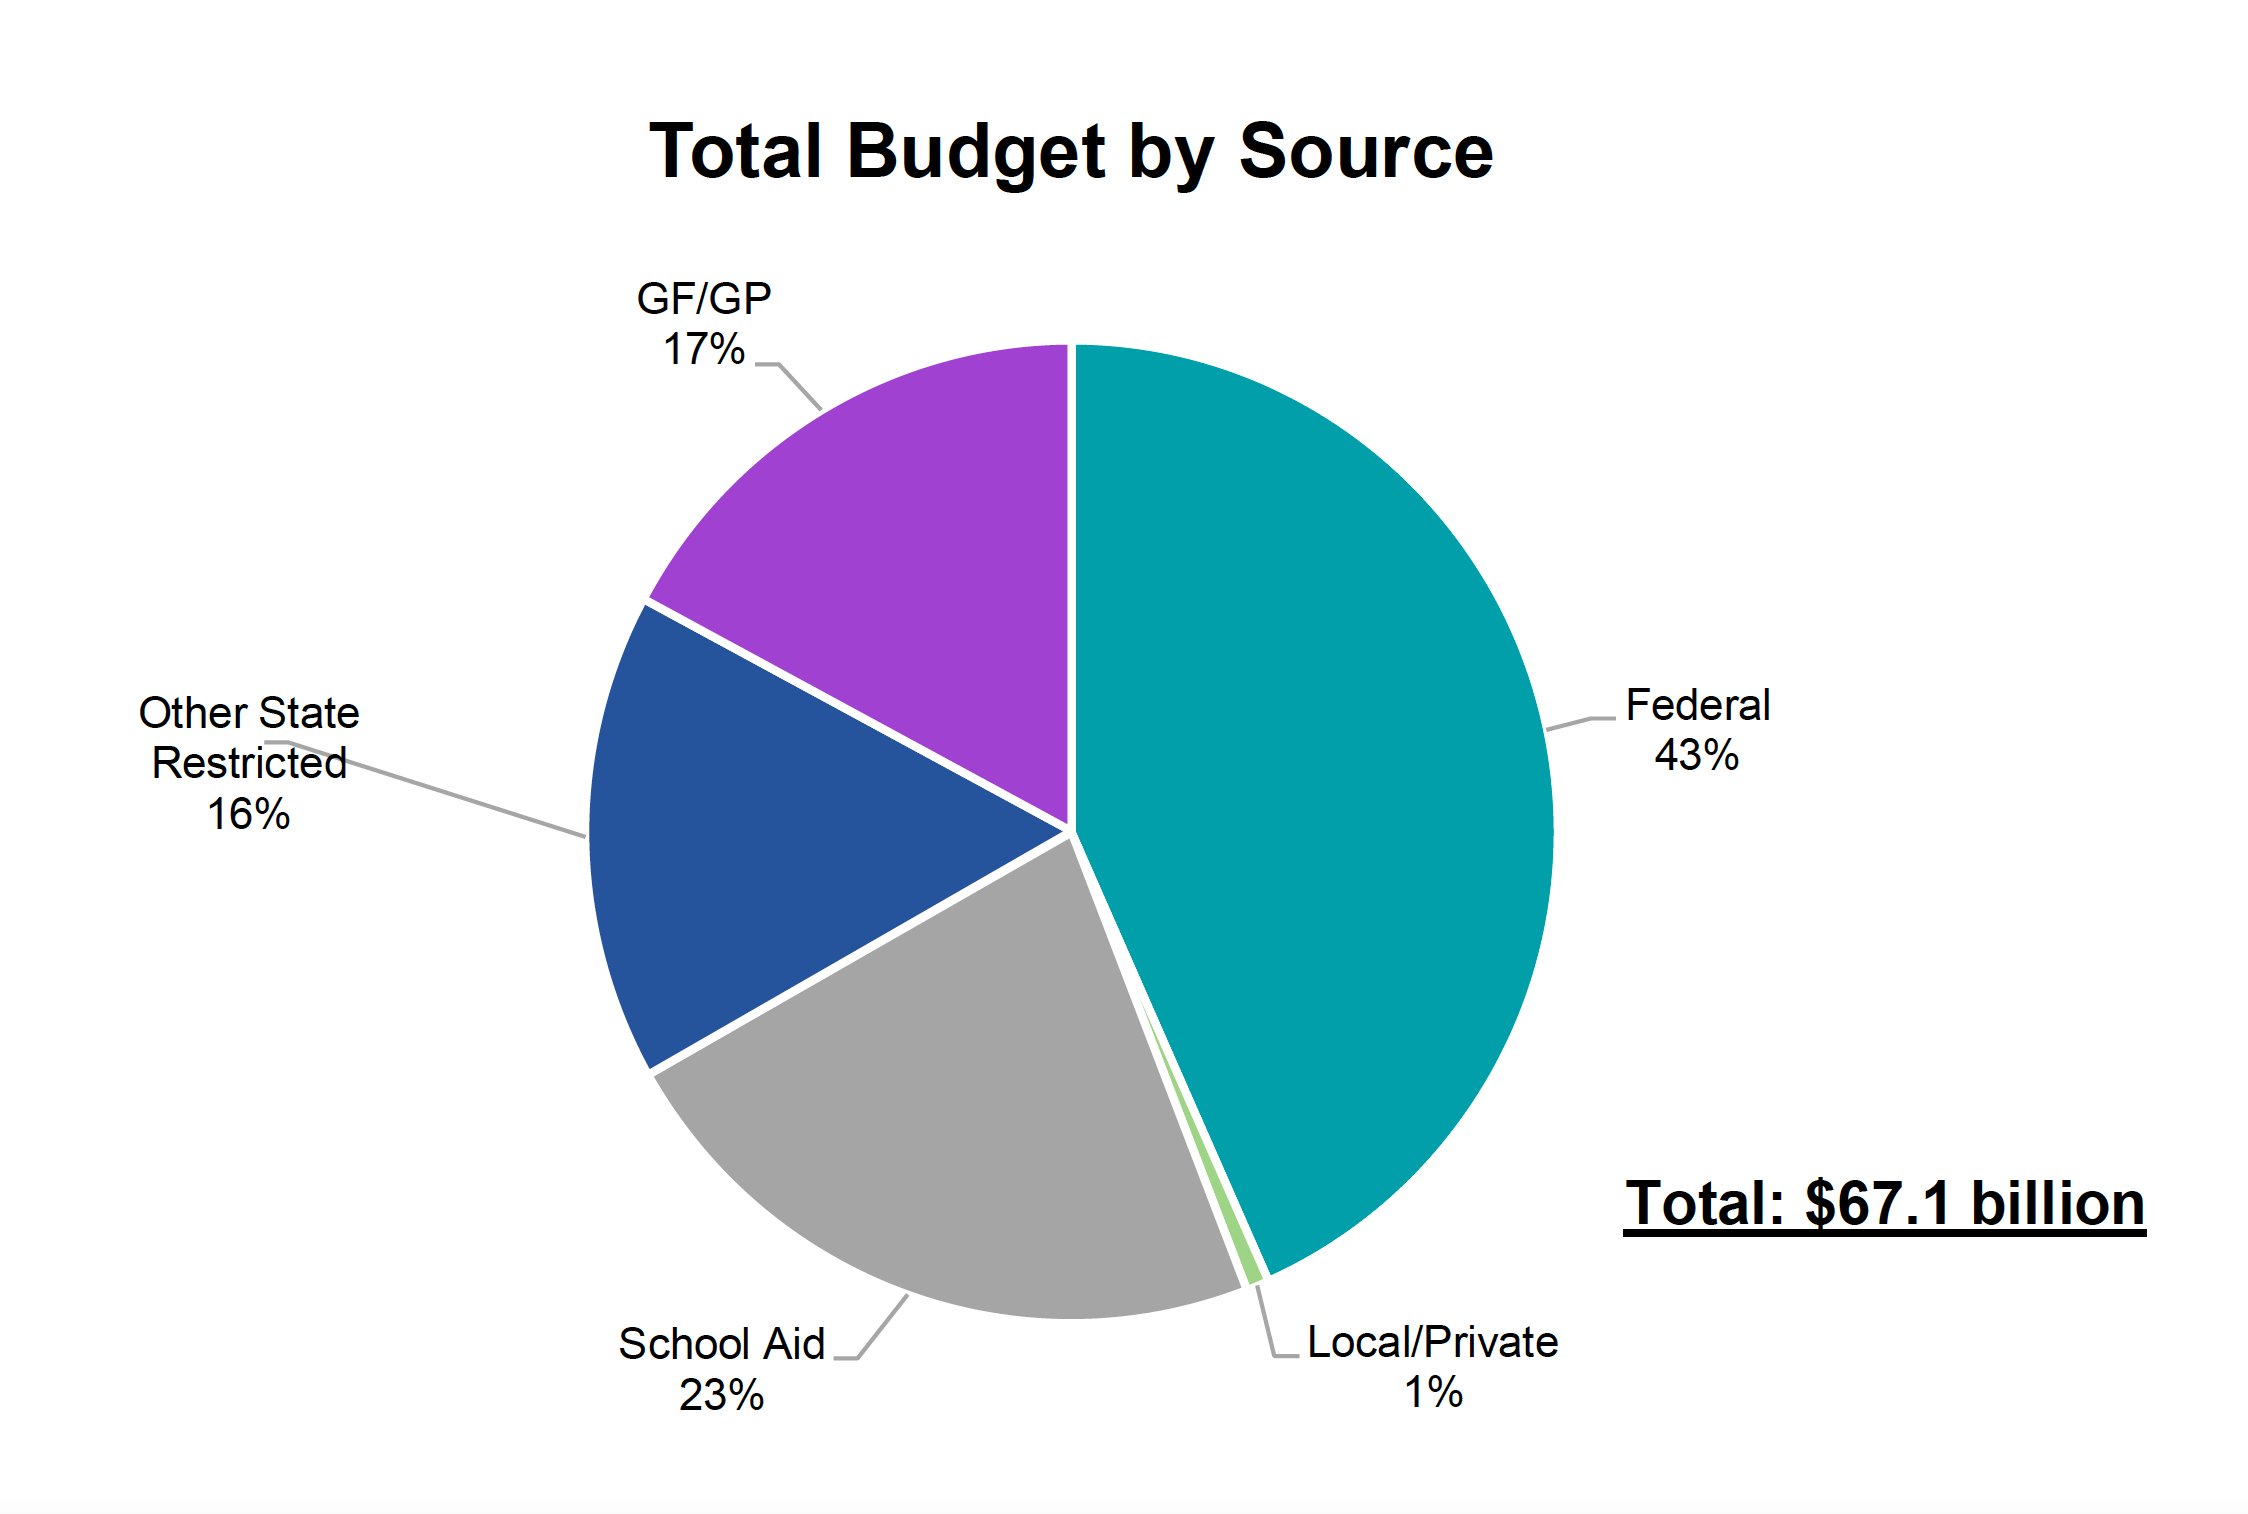 Pie chart of Total Budget by Source. GF/GP is 17%, Other State Restricted 16%, School Aid 23%, Local/Private 1%, Federal 43%, Total: $67.1B